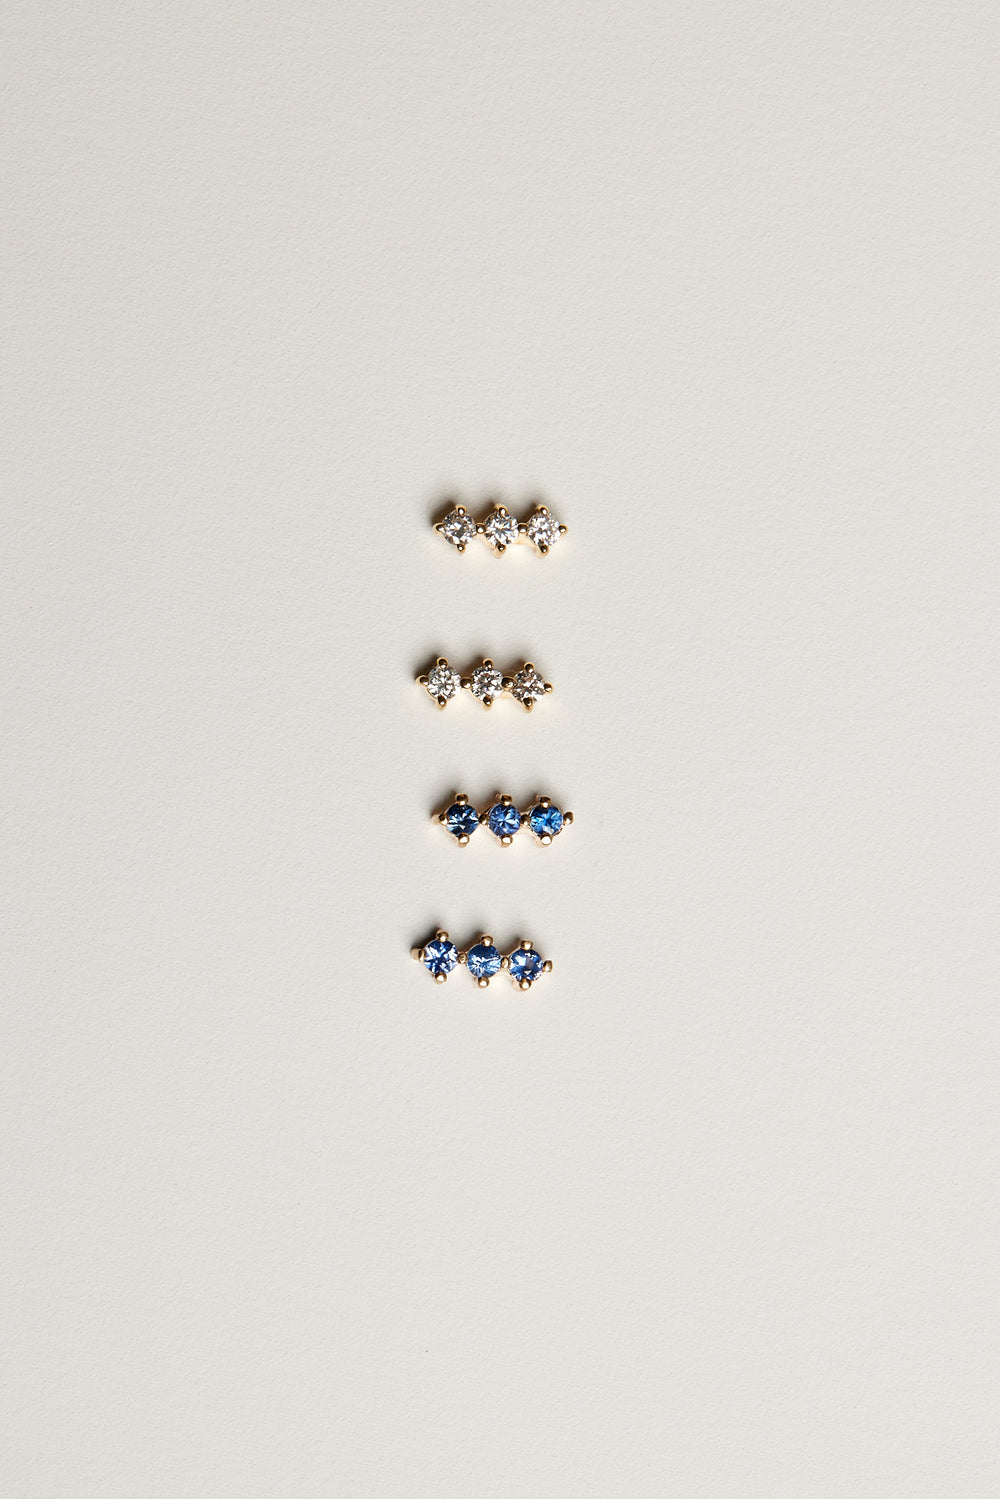 Buttercup Sapphire Bar Earrings | Yellow Gold, More Options Available| Natasha Schweitzer